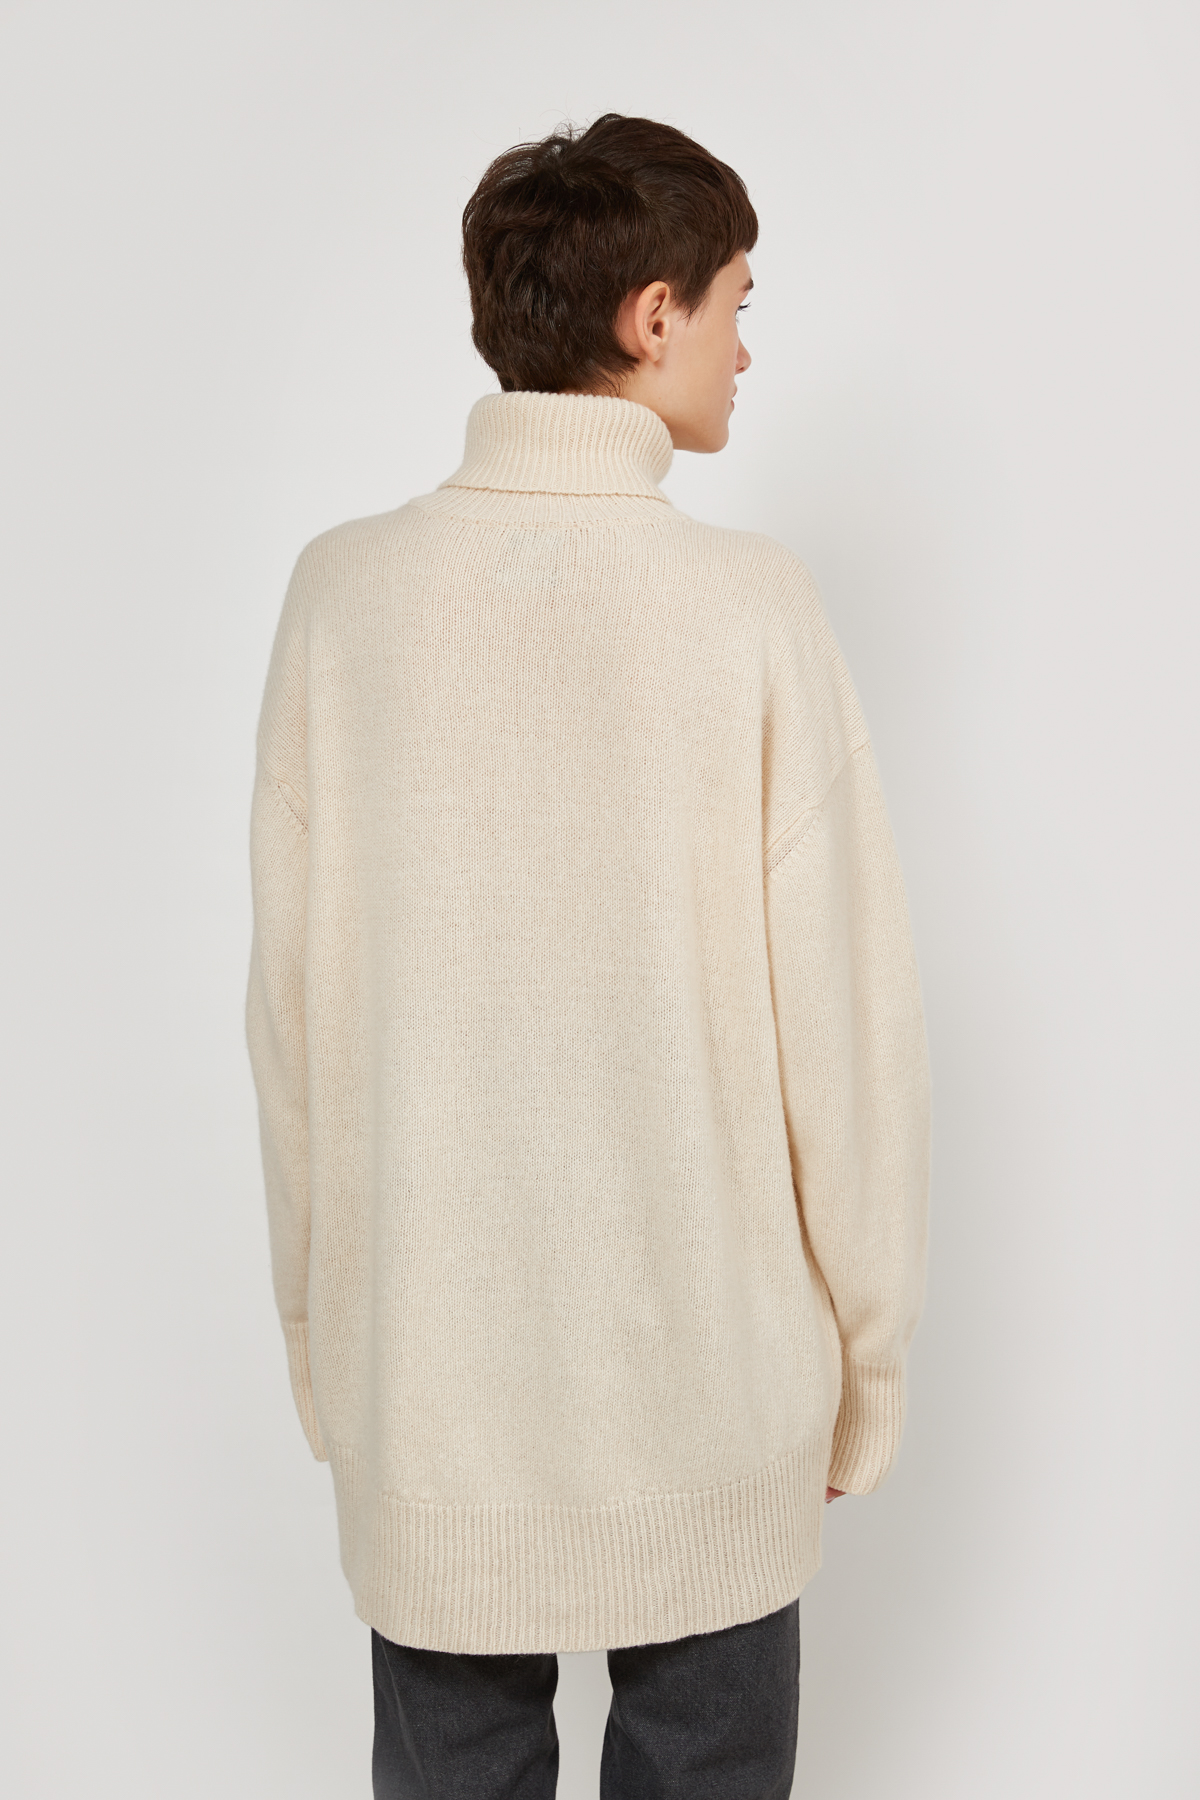 Cashmere milk knitted oversized sweater, photo 4